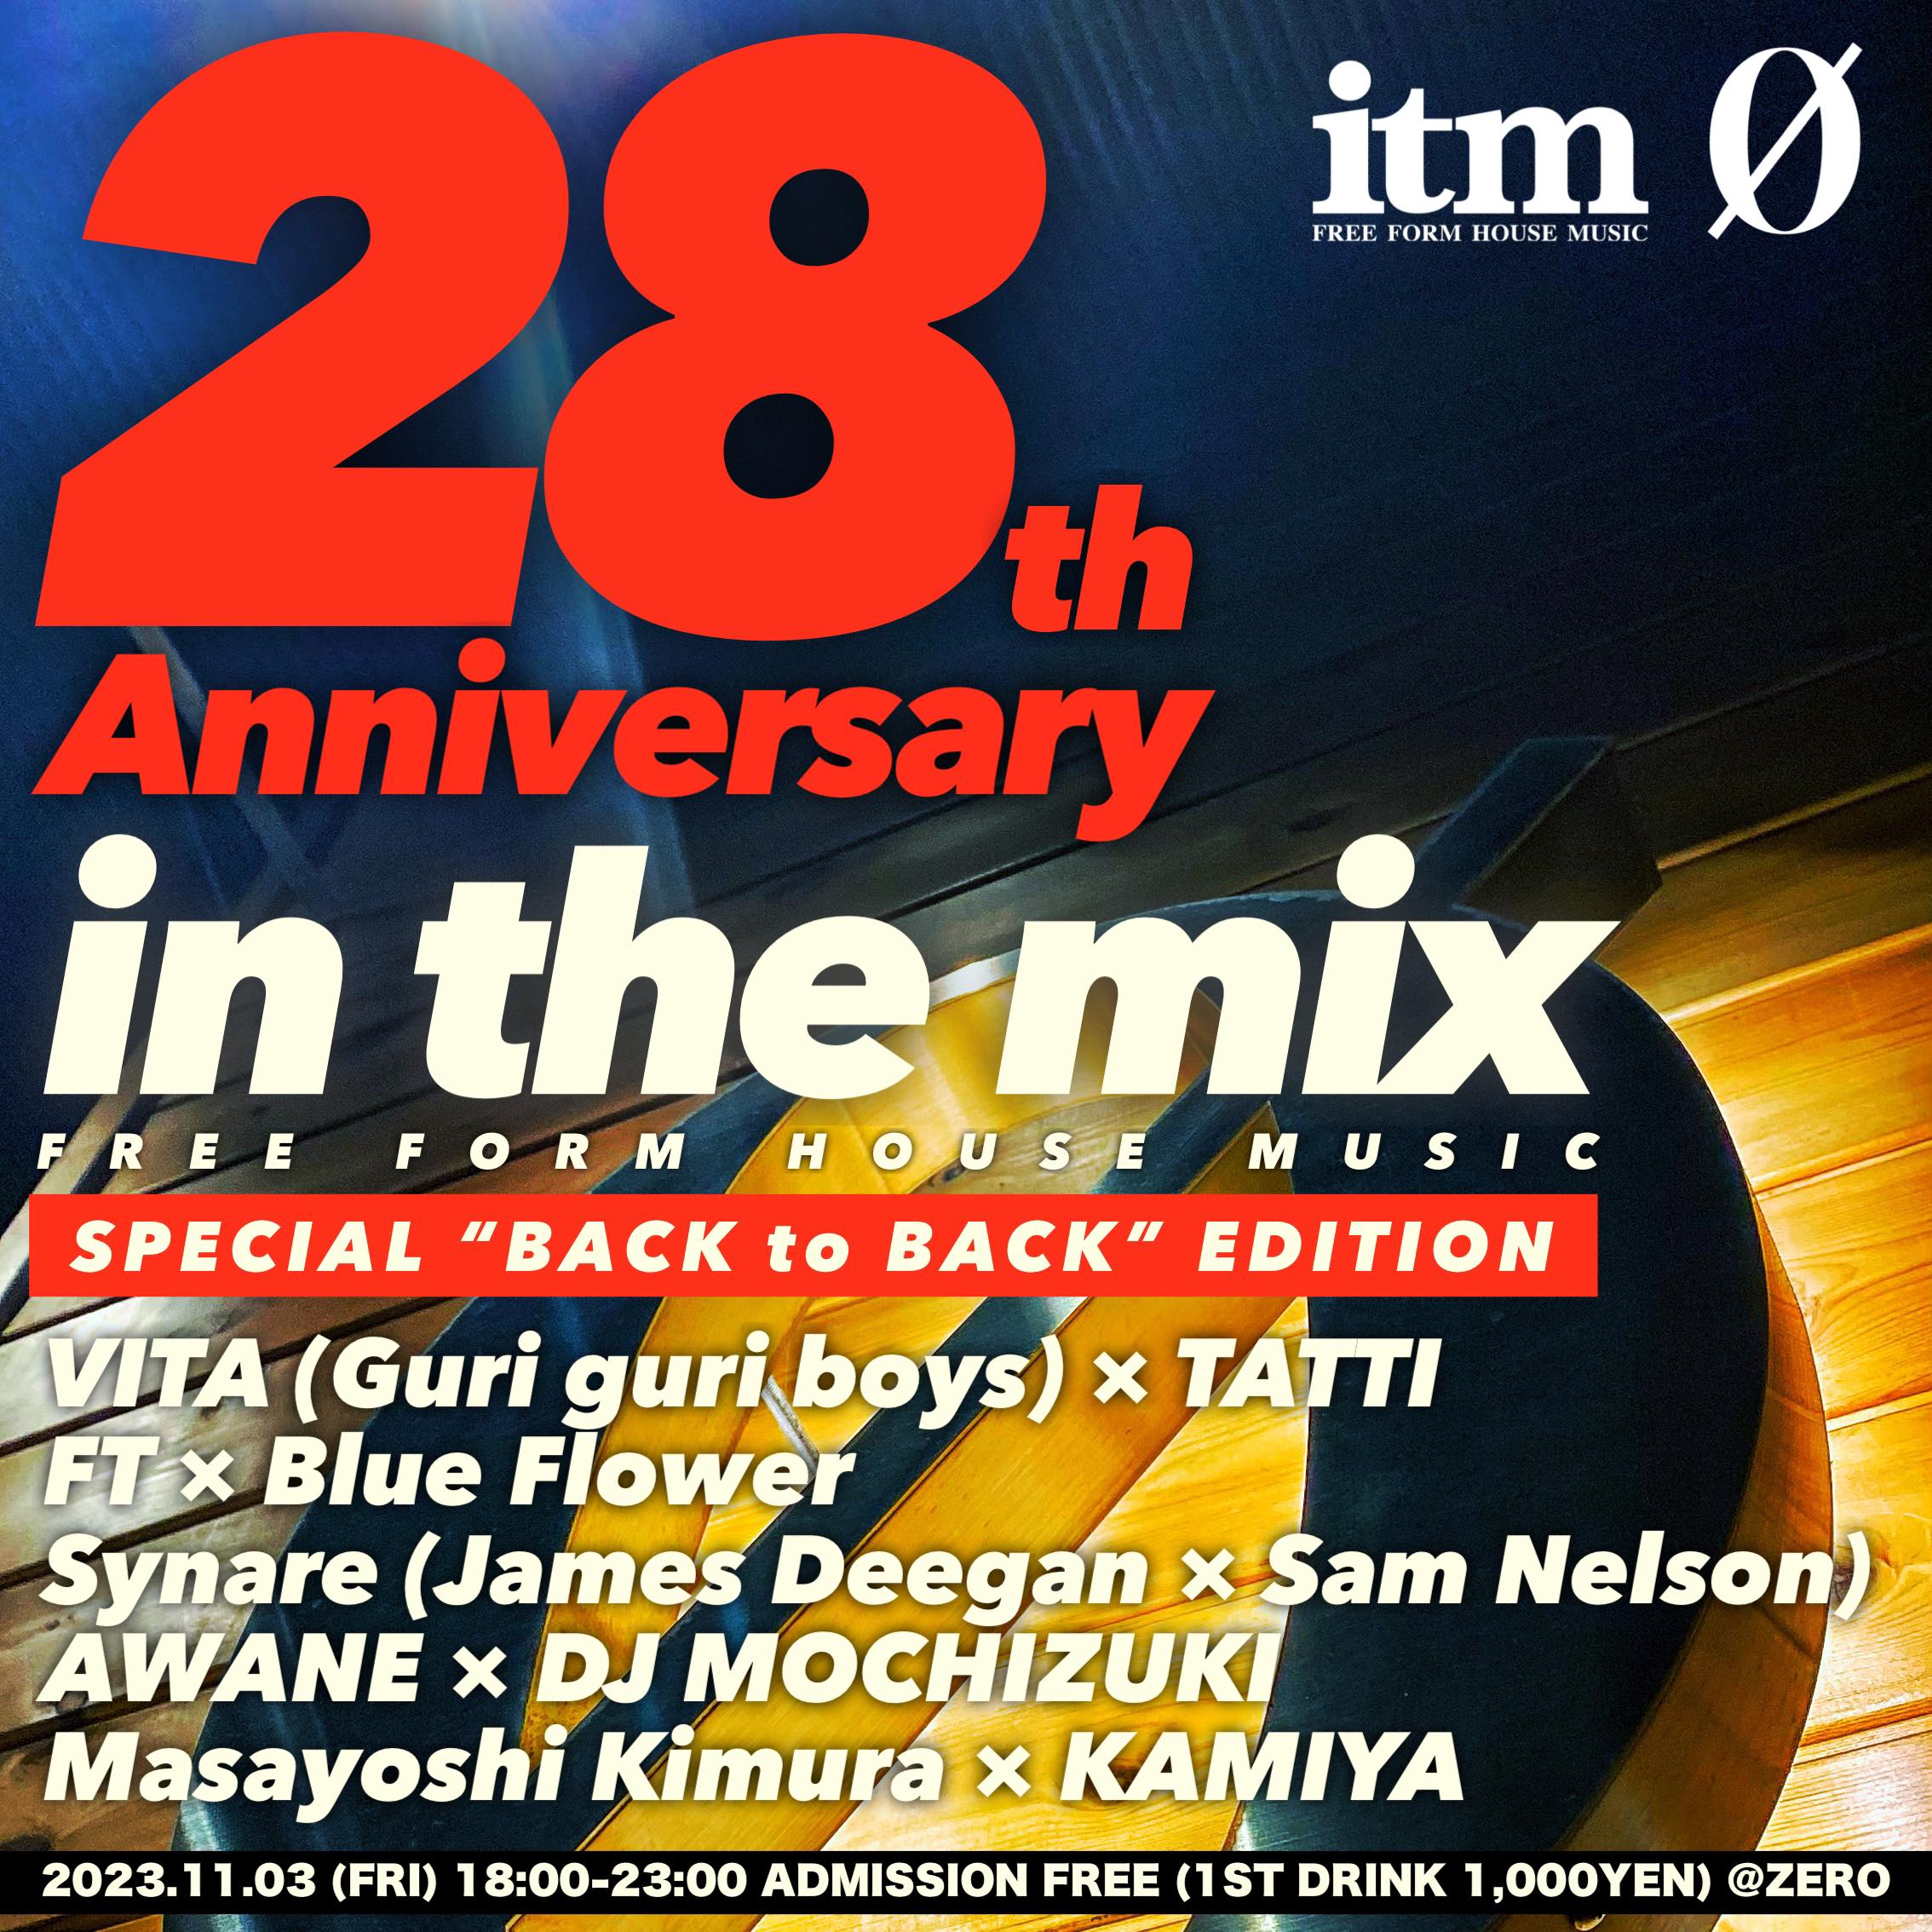 in the mix -FREE FORM HOUSE MUSIC- 28th Anniversary  SPECIAL “BACK to BACK EDITION”